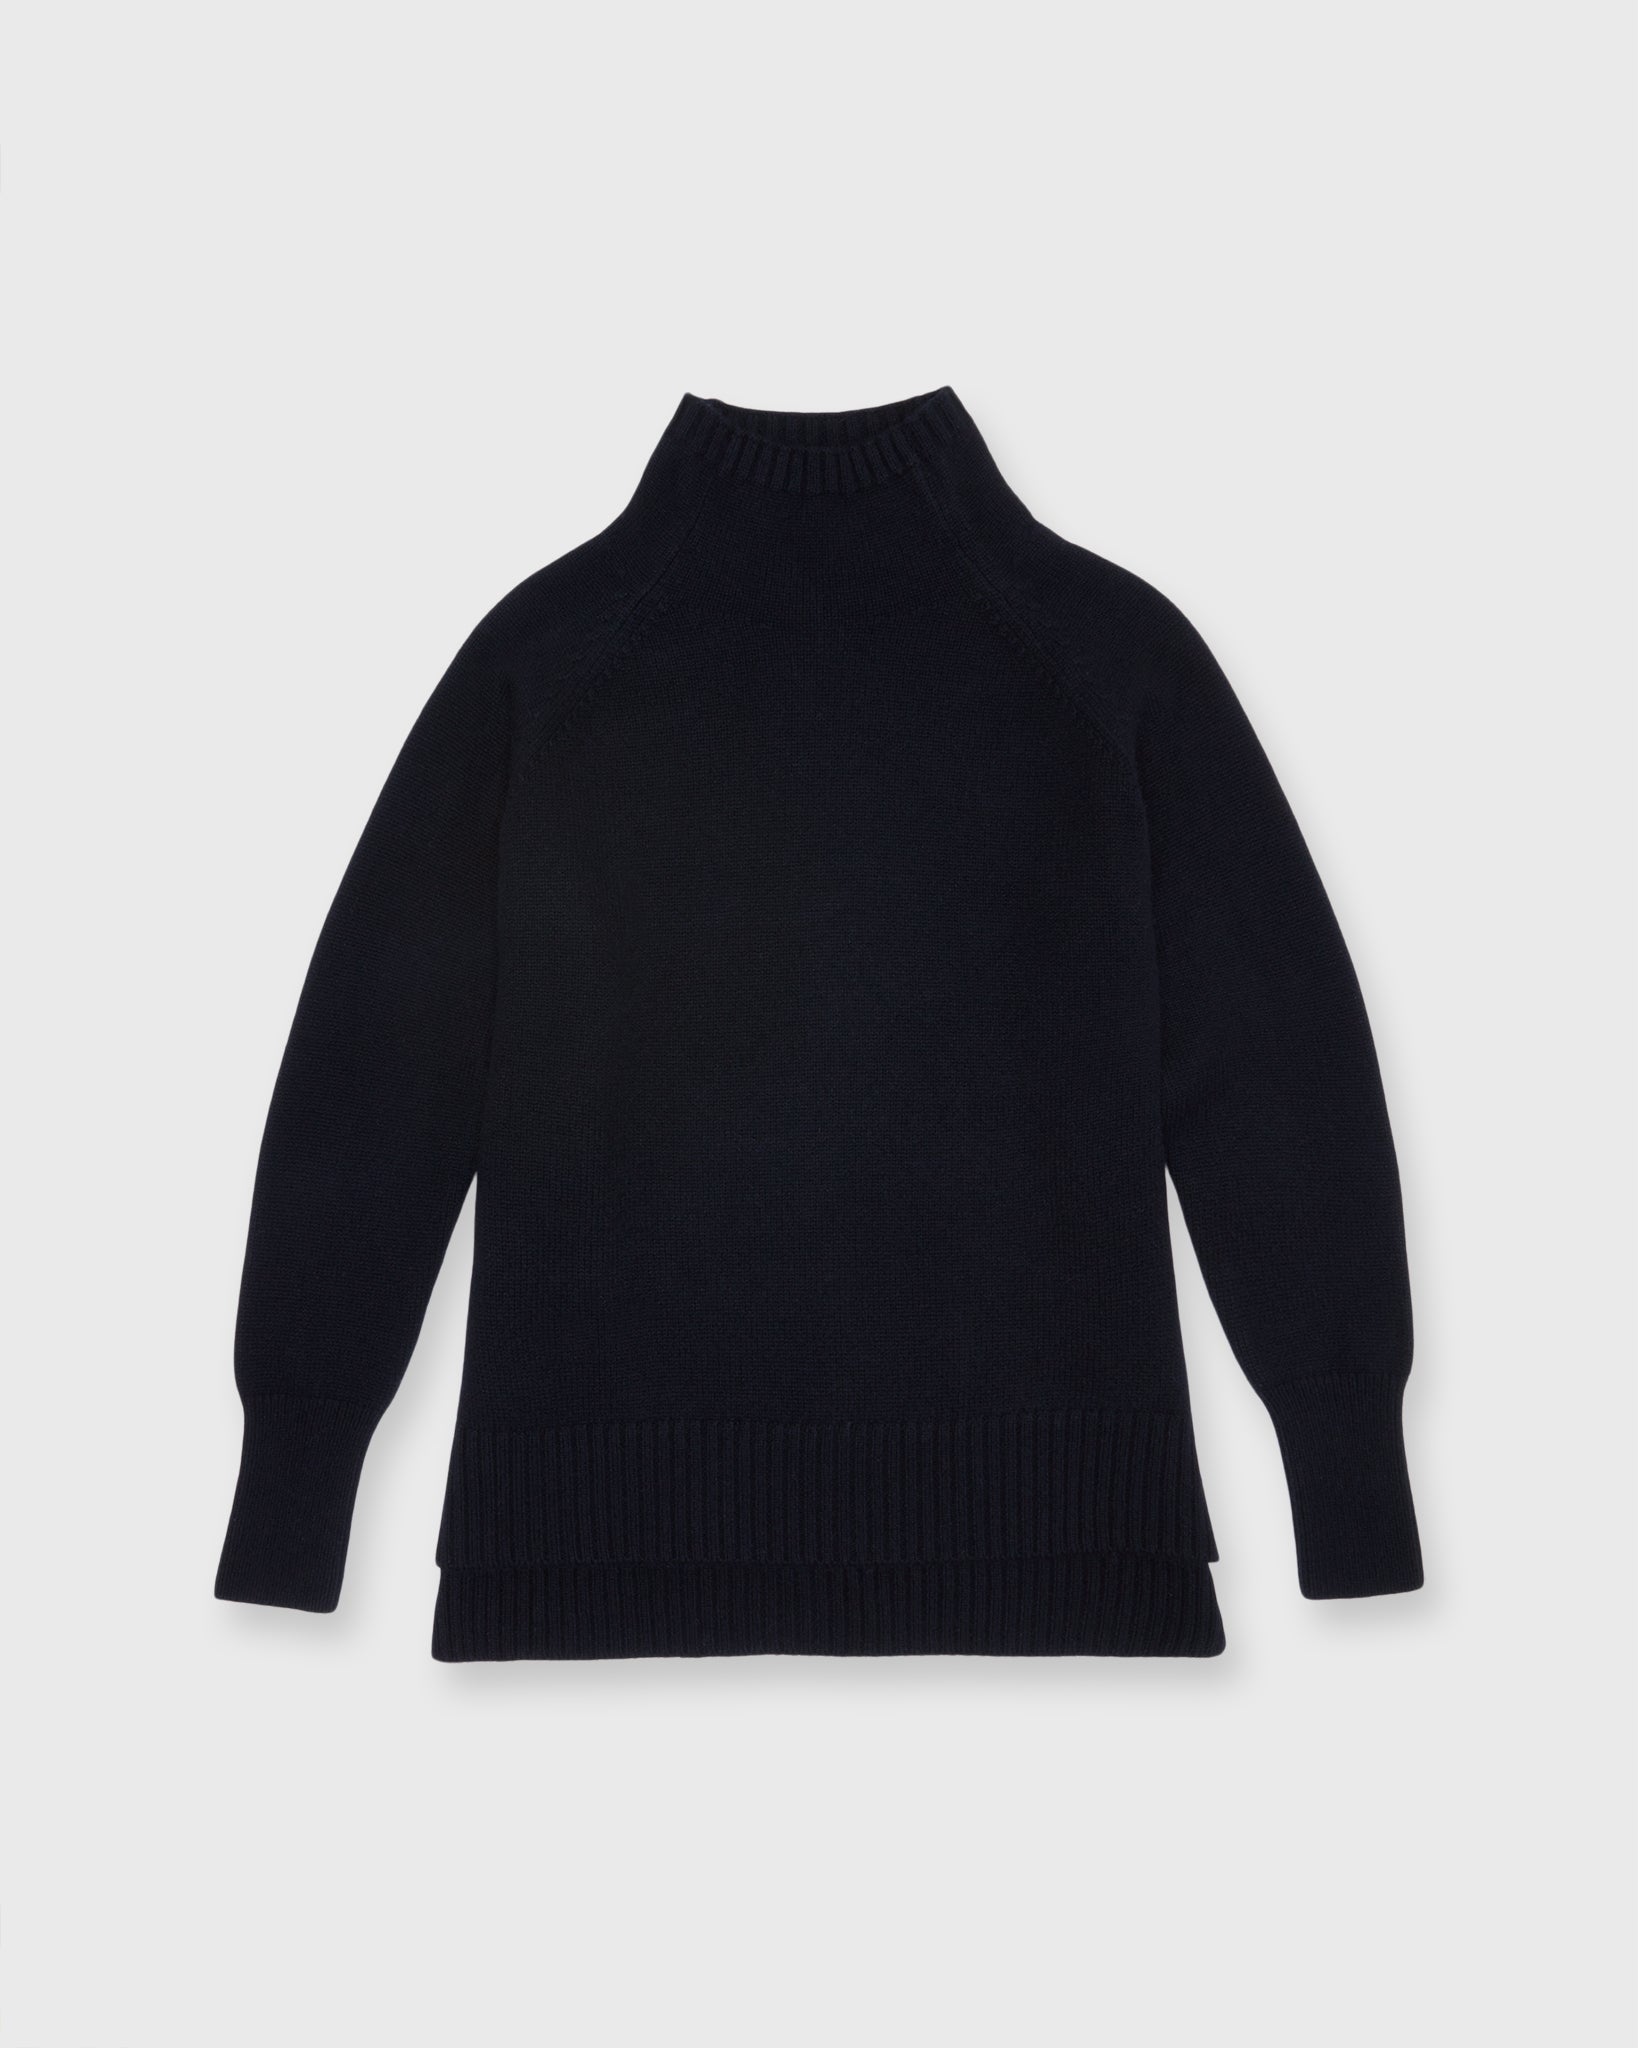 Marie Funnel-Neck Sweater in Black Cashmere